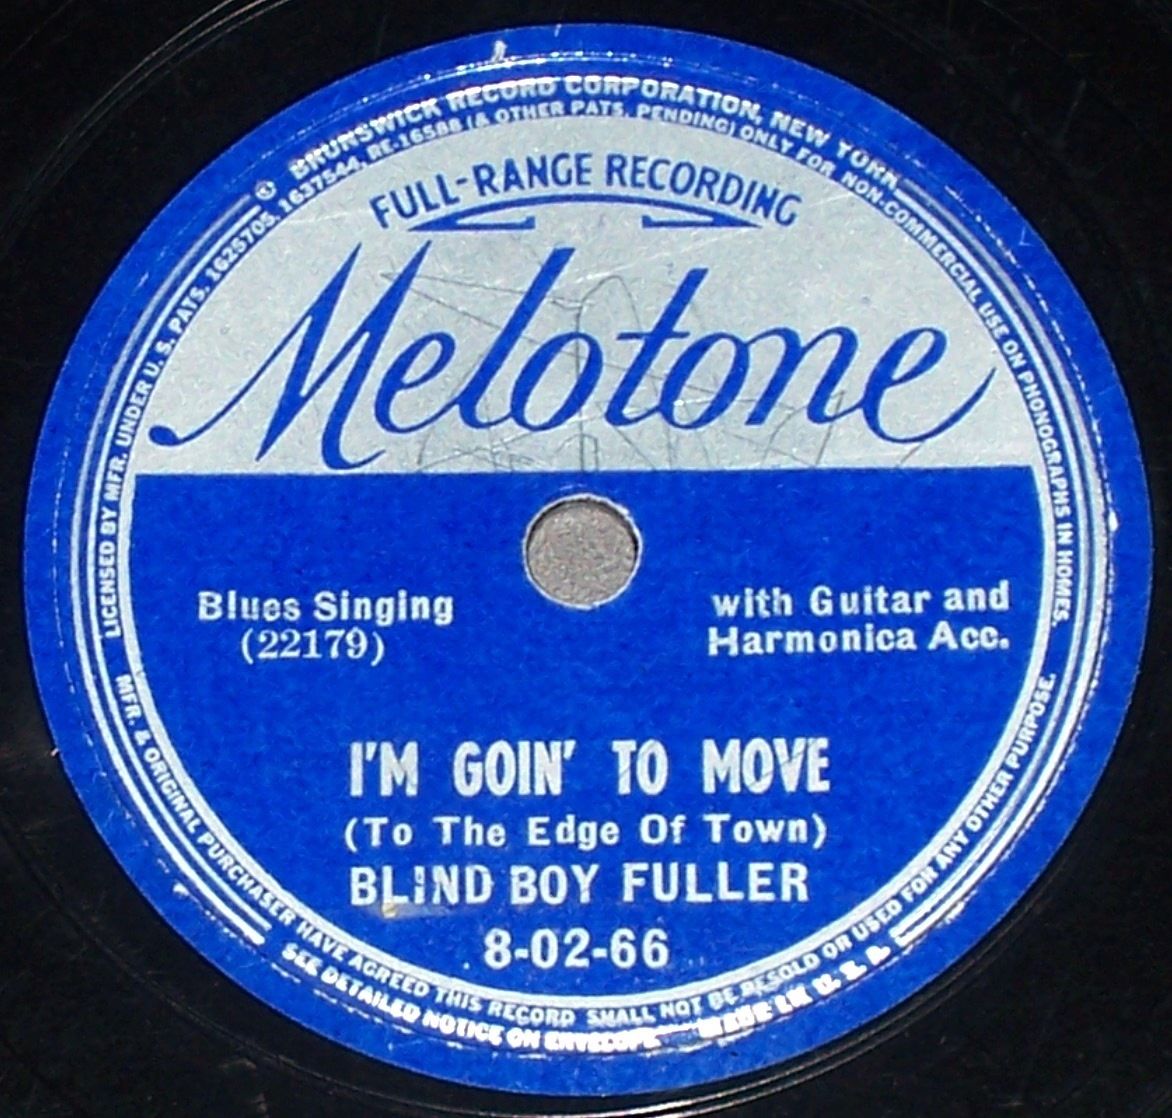 Record Label: Early label. Original silver on blue